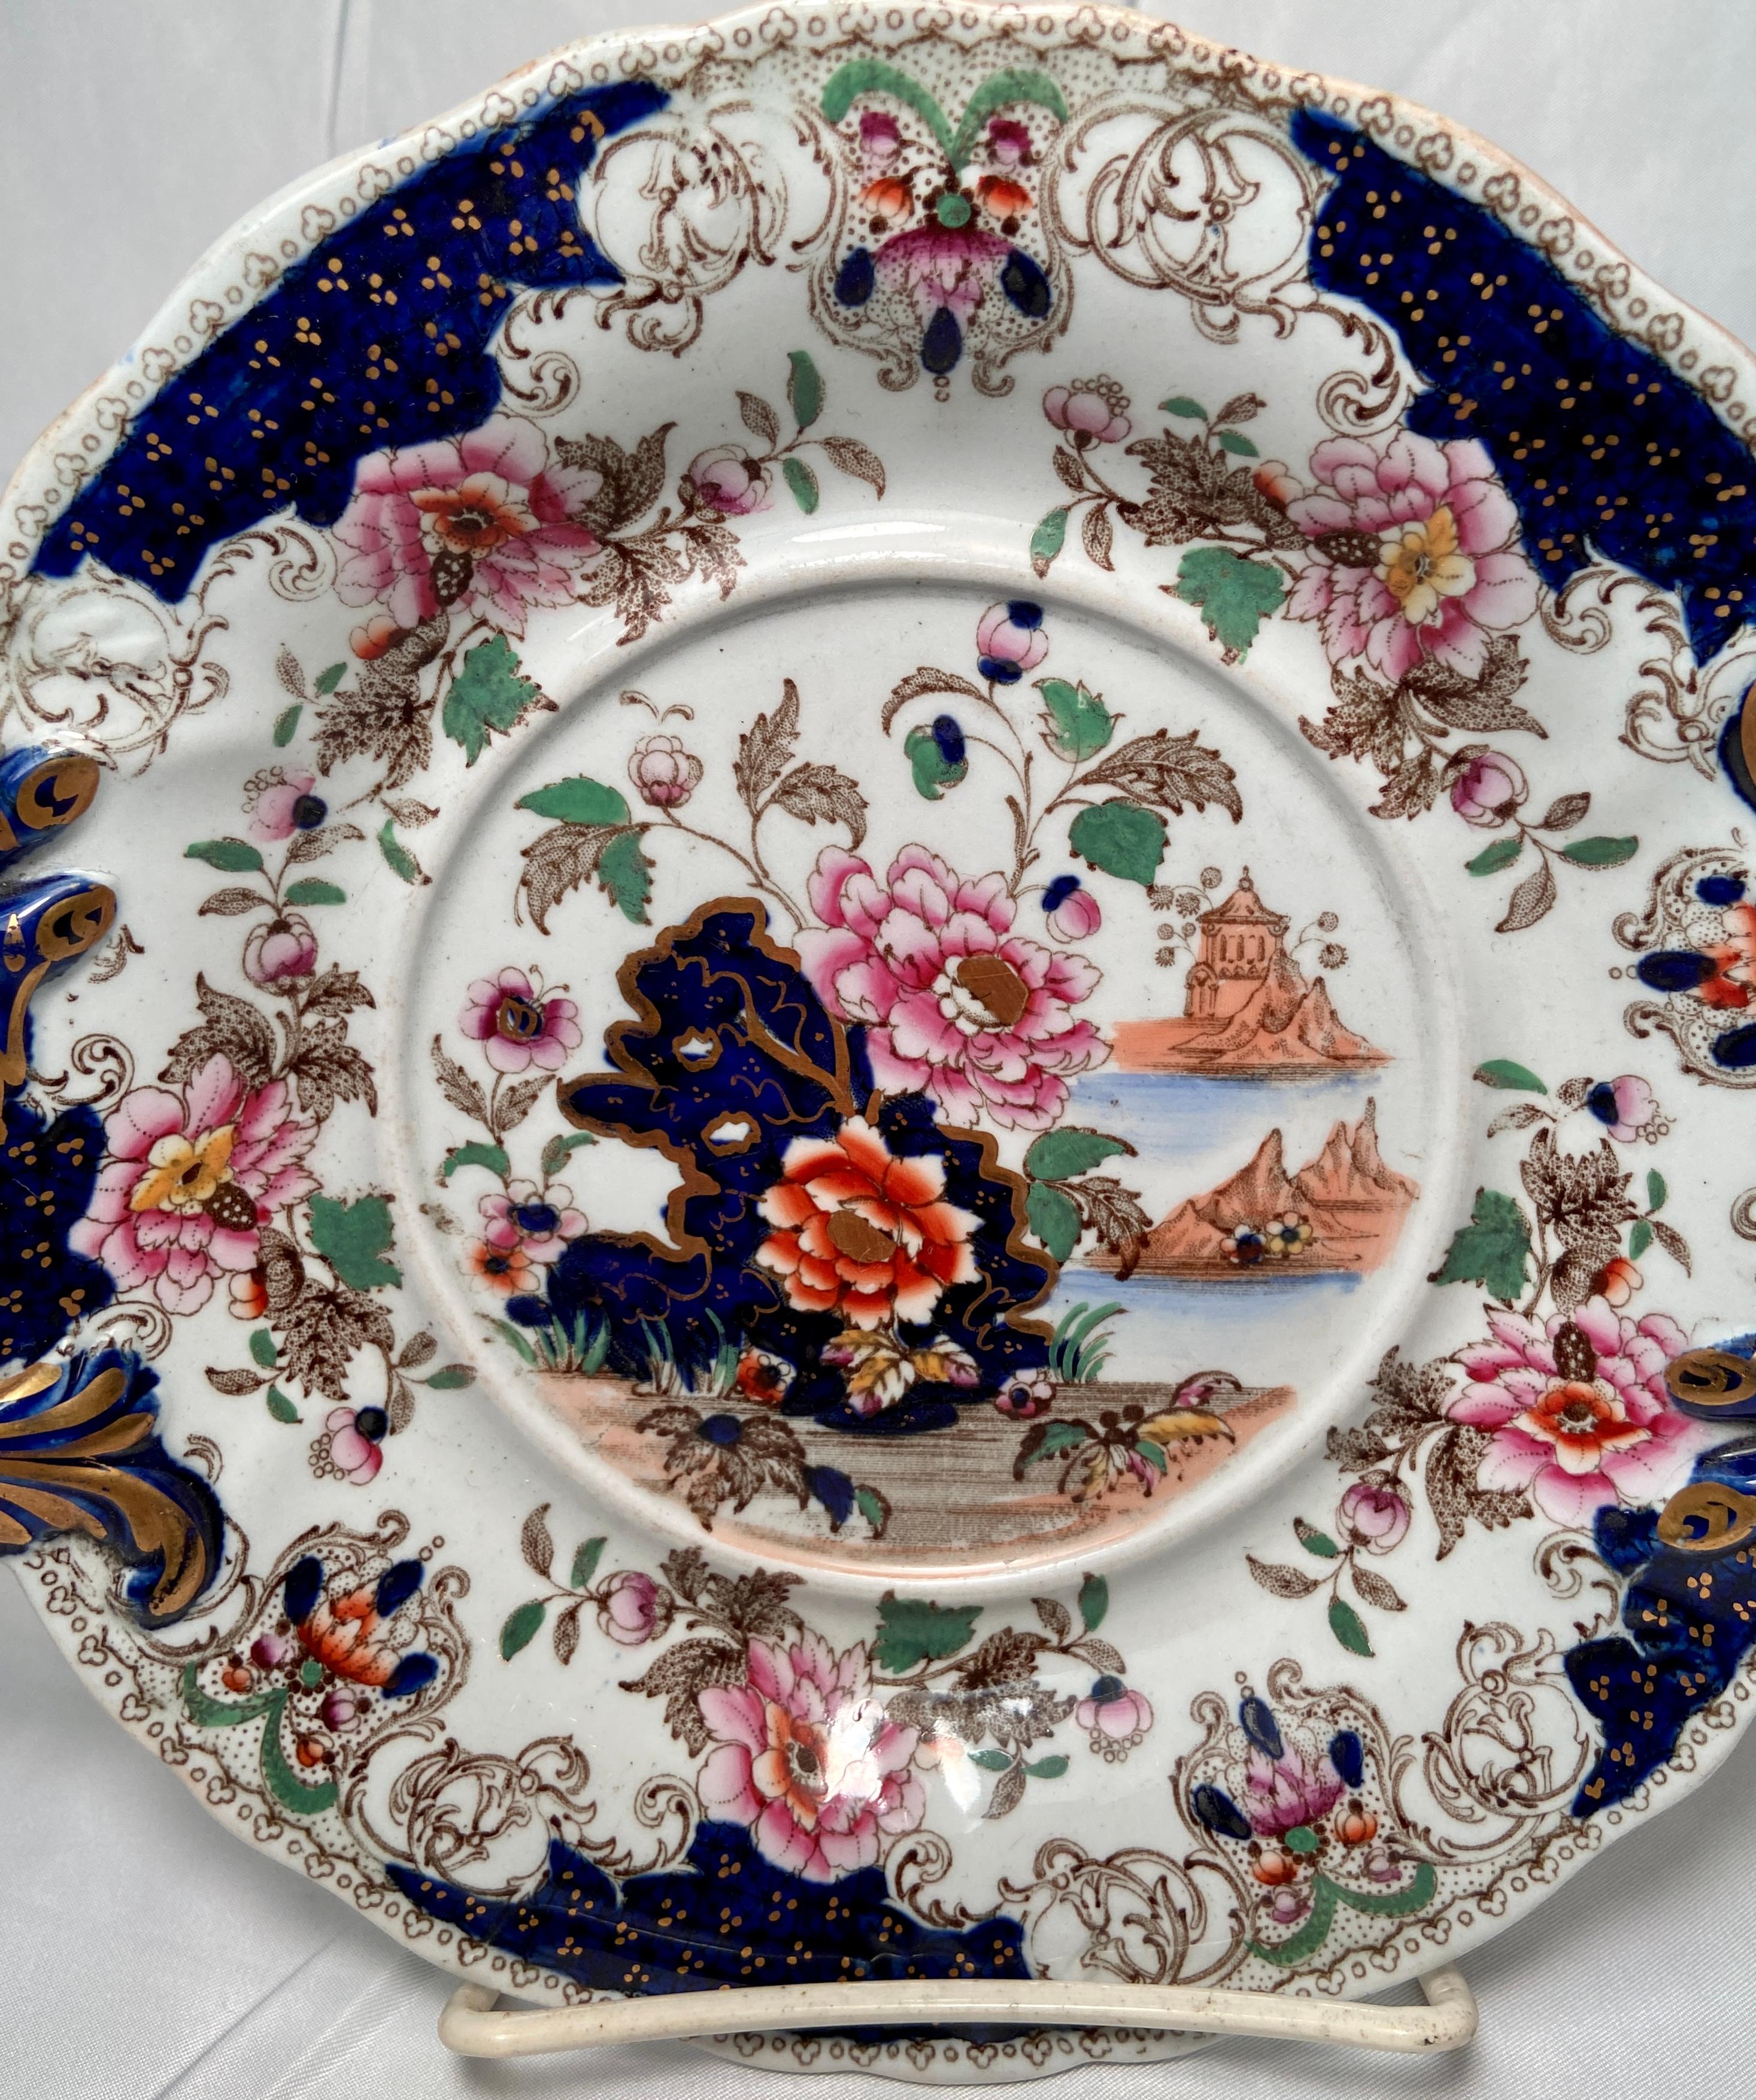 Antique English Dresden Pattern Ironstone Dinner Set, Circa 1870-1880 In Good Condition For Sale In New Orleans, LA